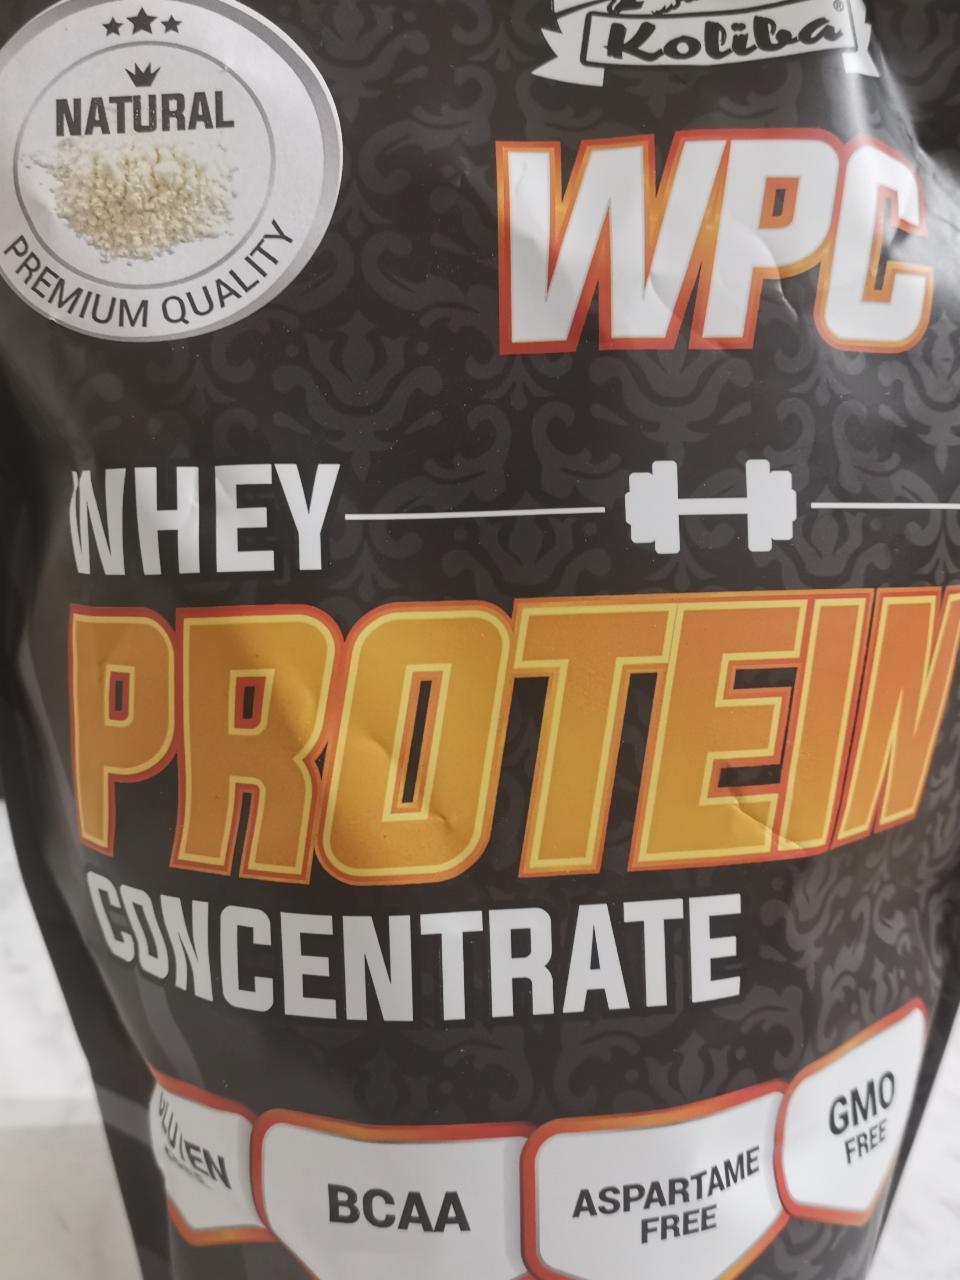 Fotografie - WPC Whey protein concentrate Natural Koliba